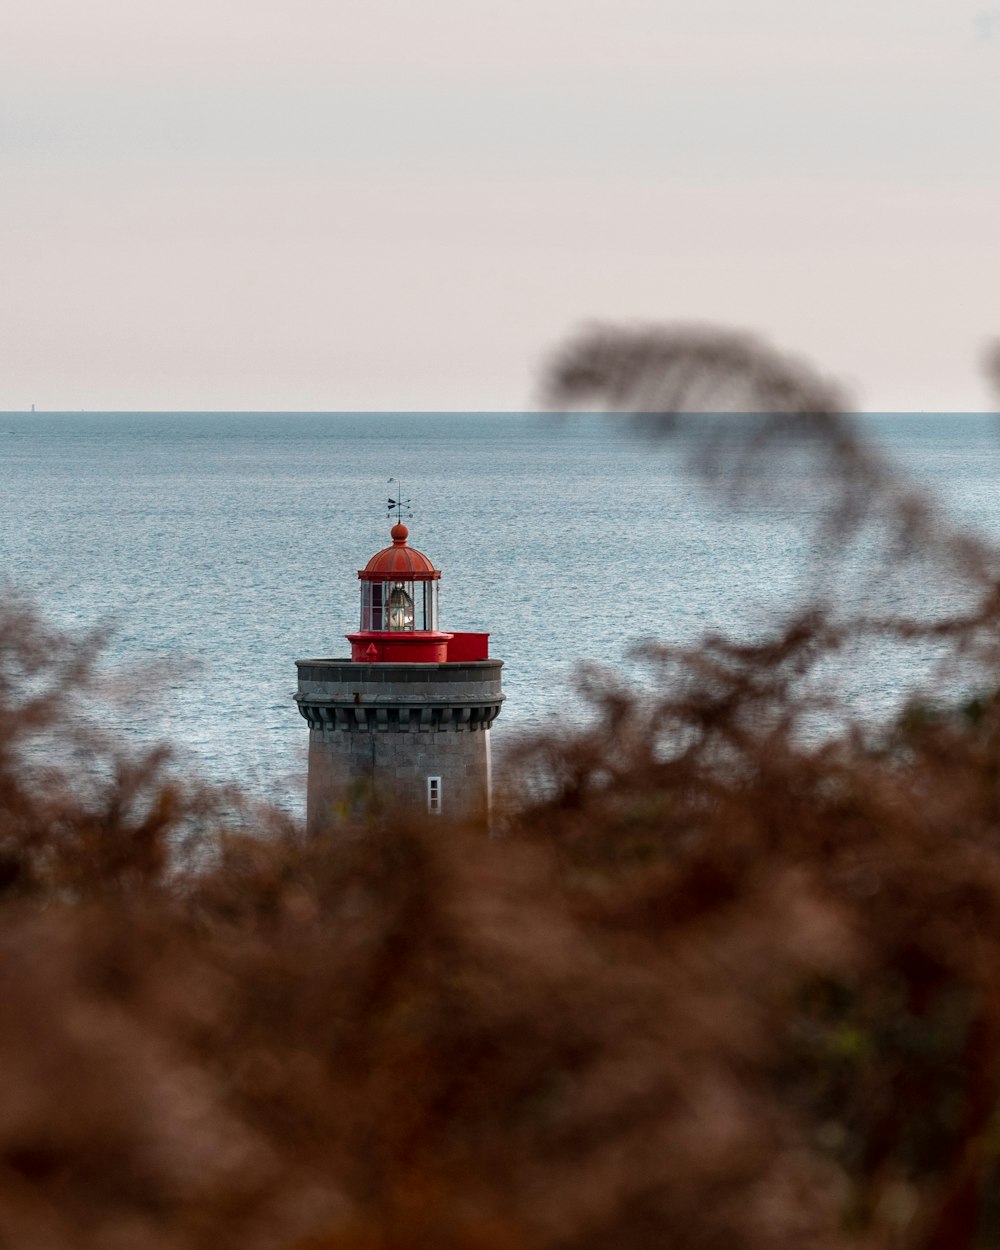 white and red lighthouse near body of water during daytime